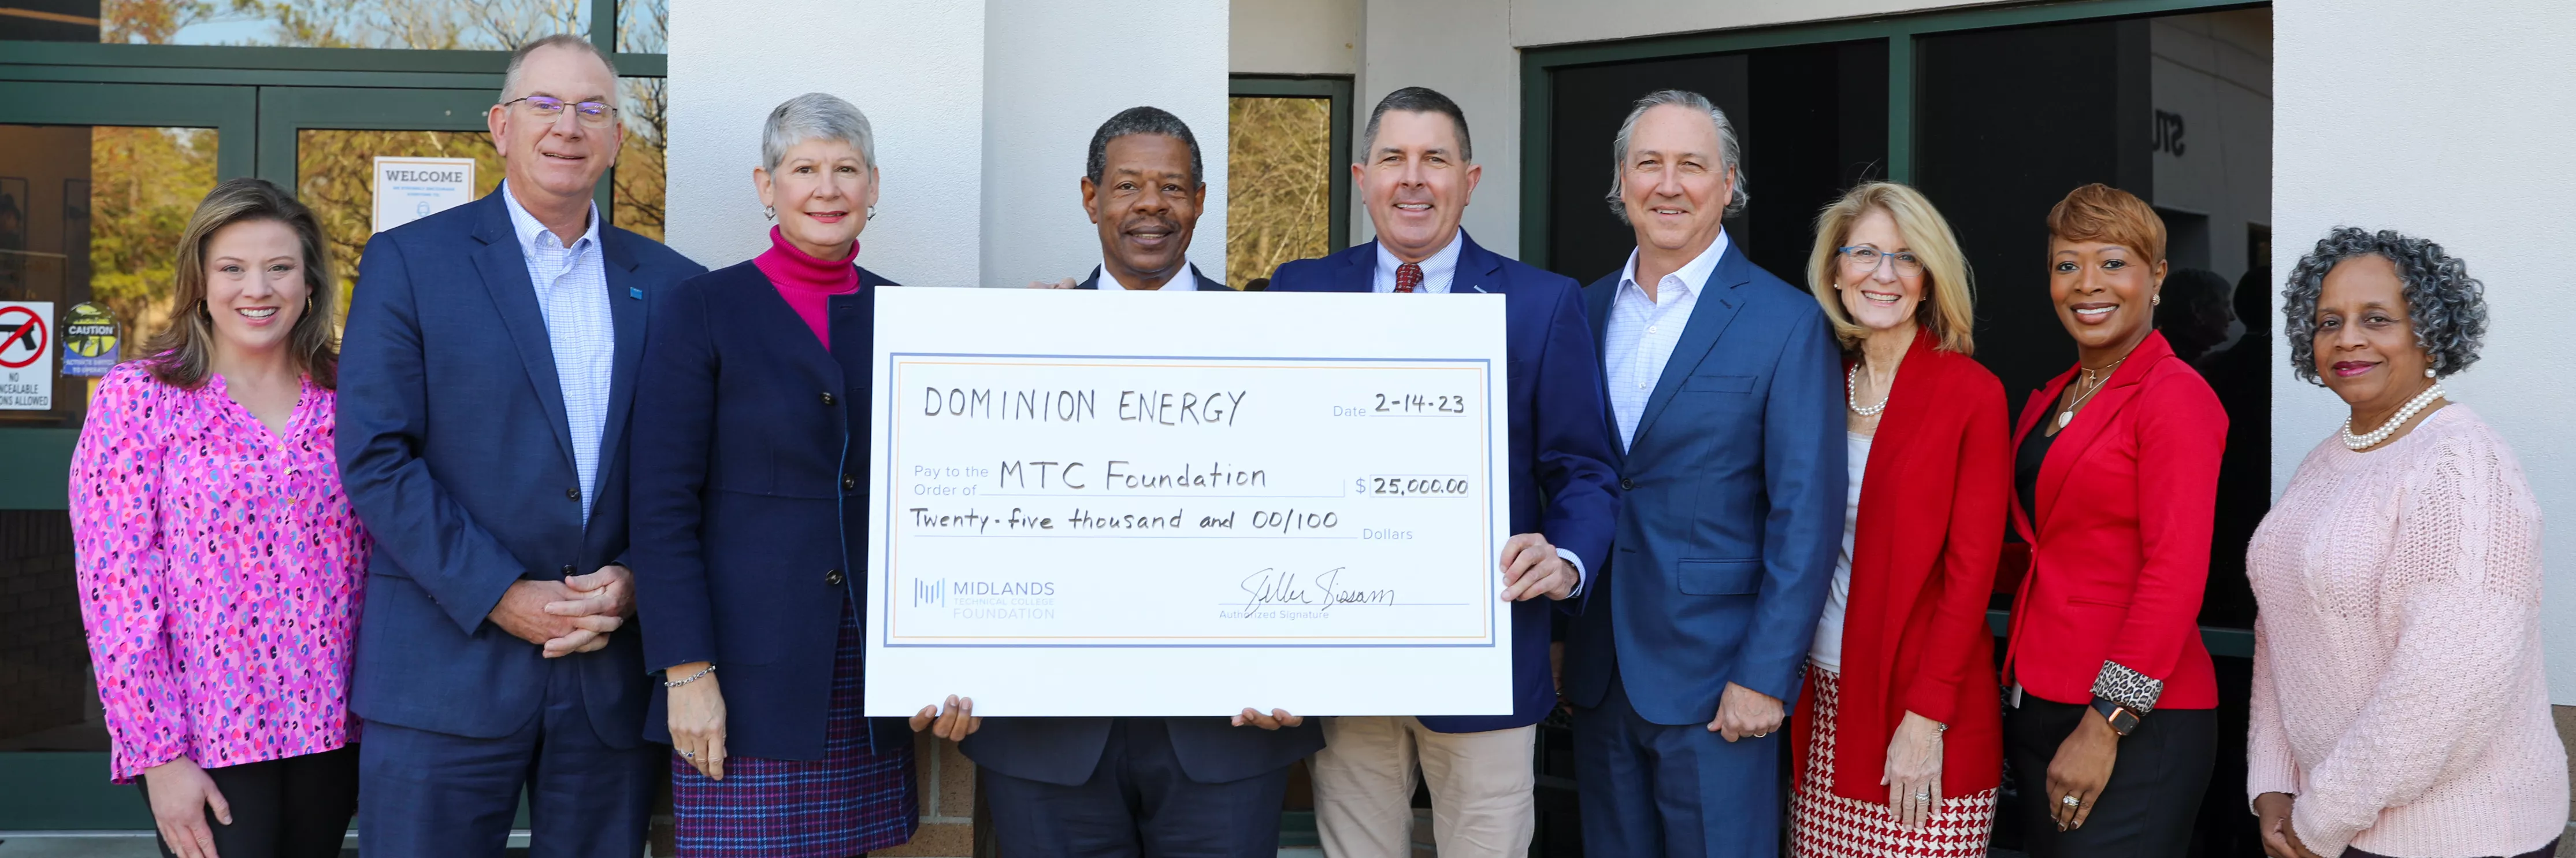 Image of Dominion Energy representatives presenting a $25,000 check to Midlands Technical College leadership.